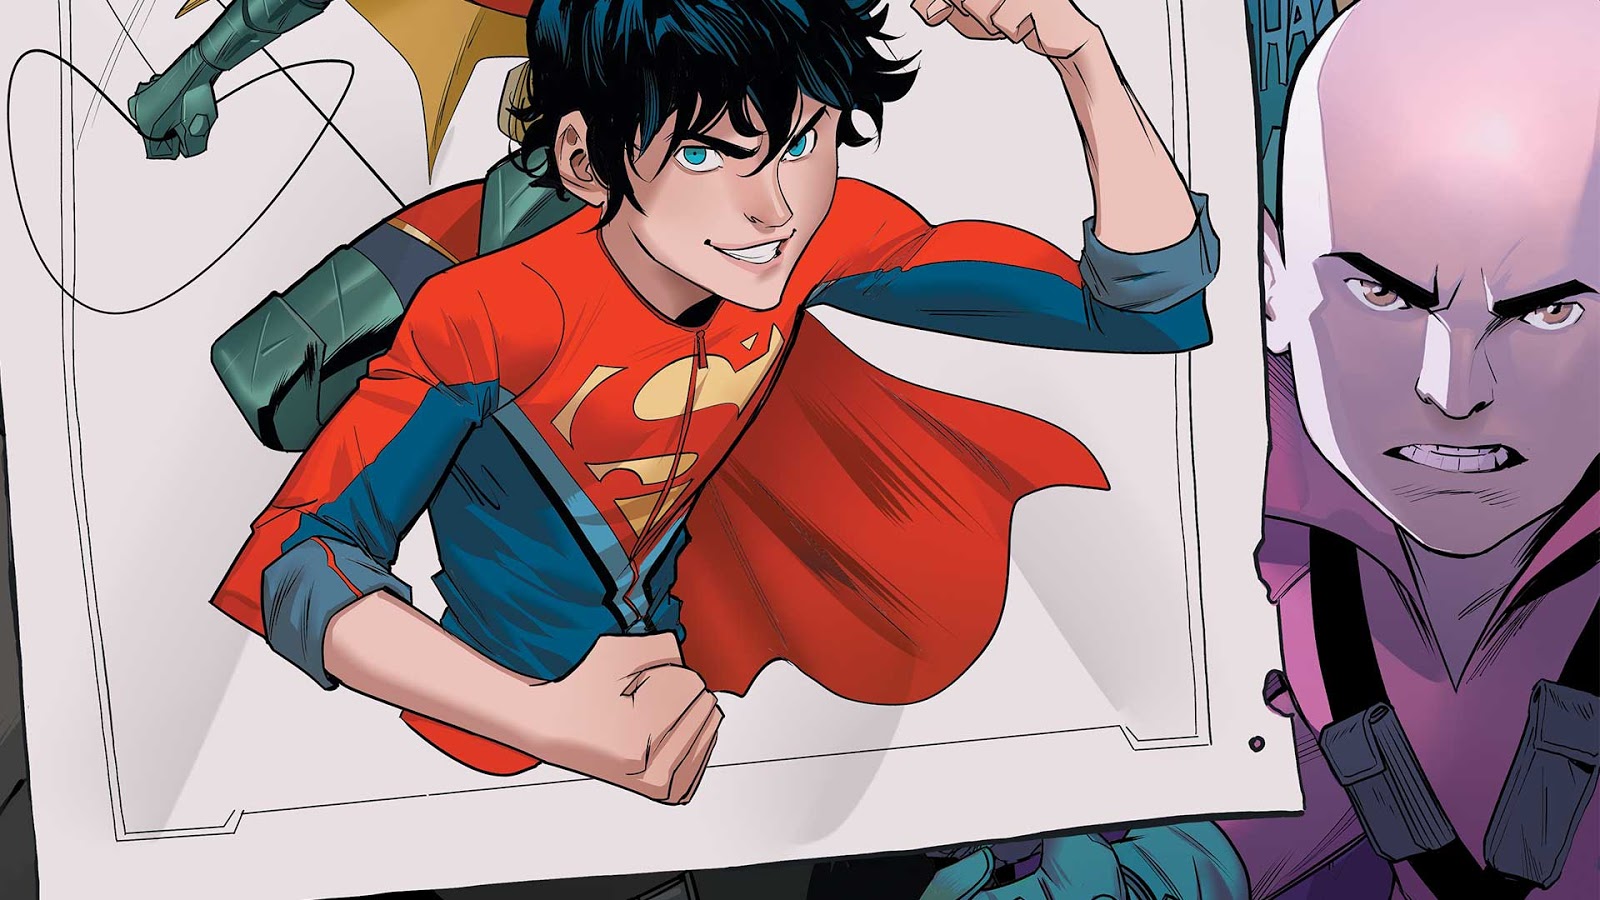 Weird Science Dc Comics Preview Adventures Of The Super Sons